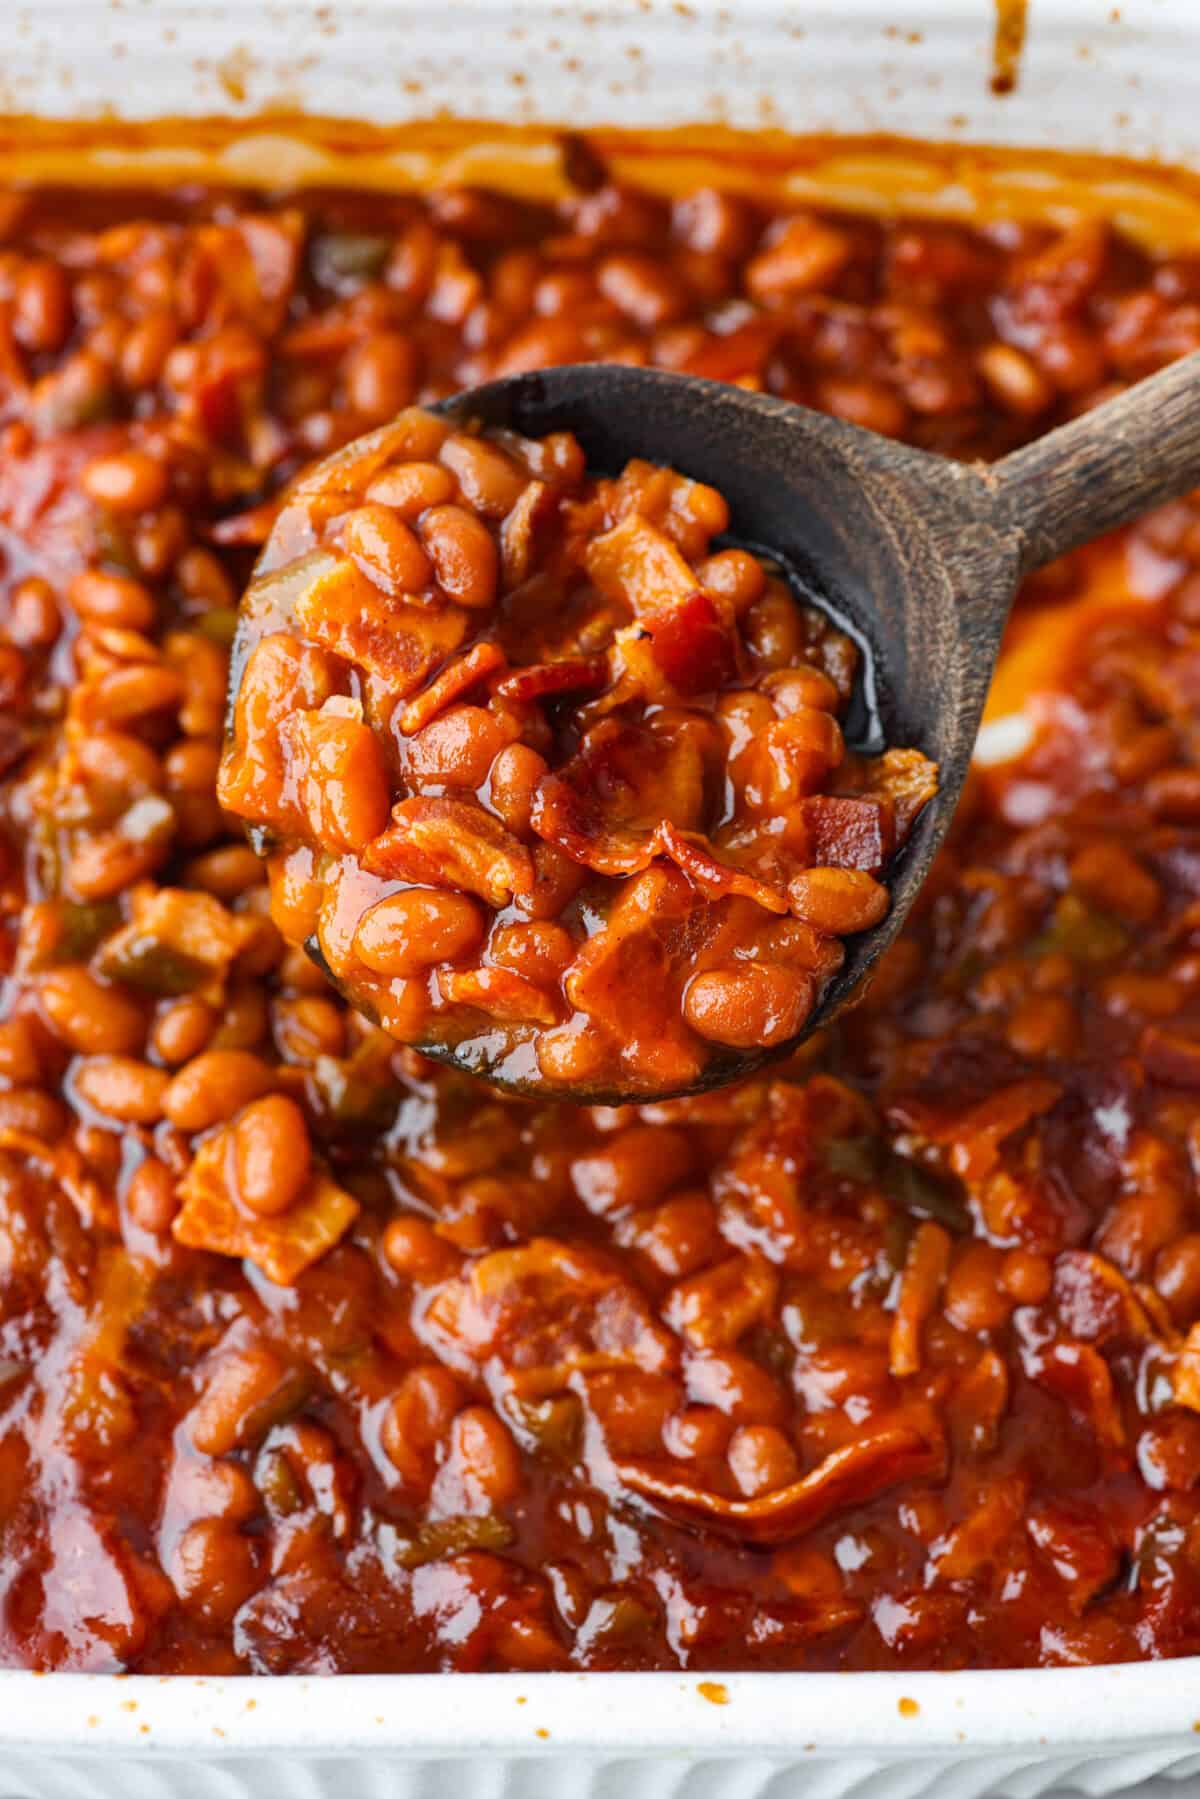 Close view of the baked beans spooned with a wooden spoon.